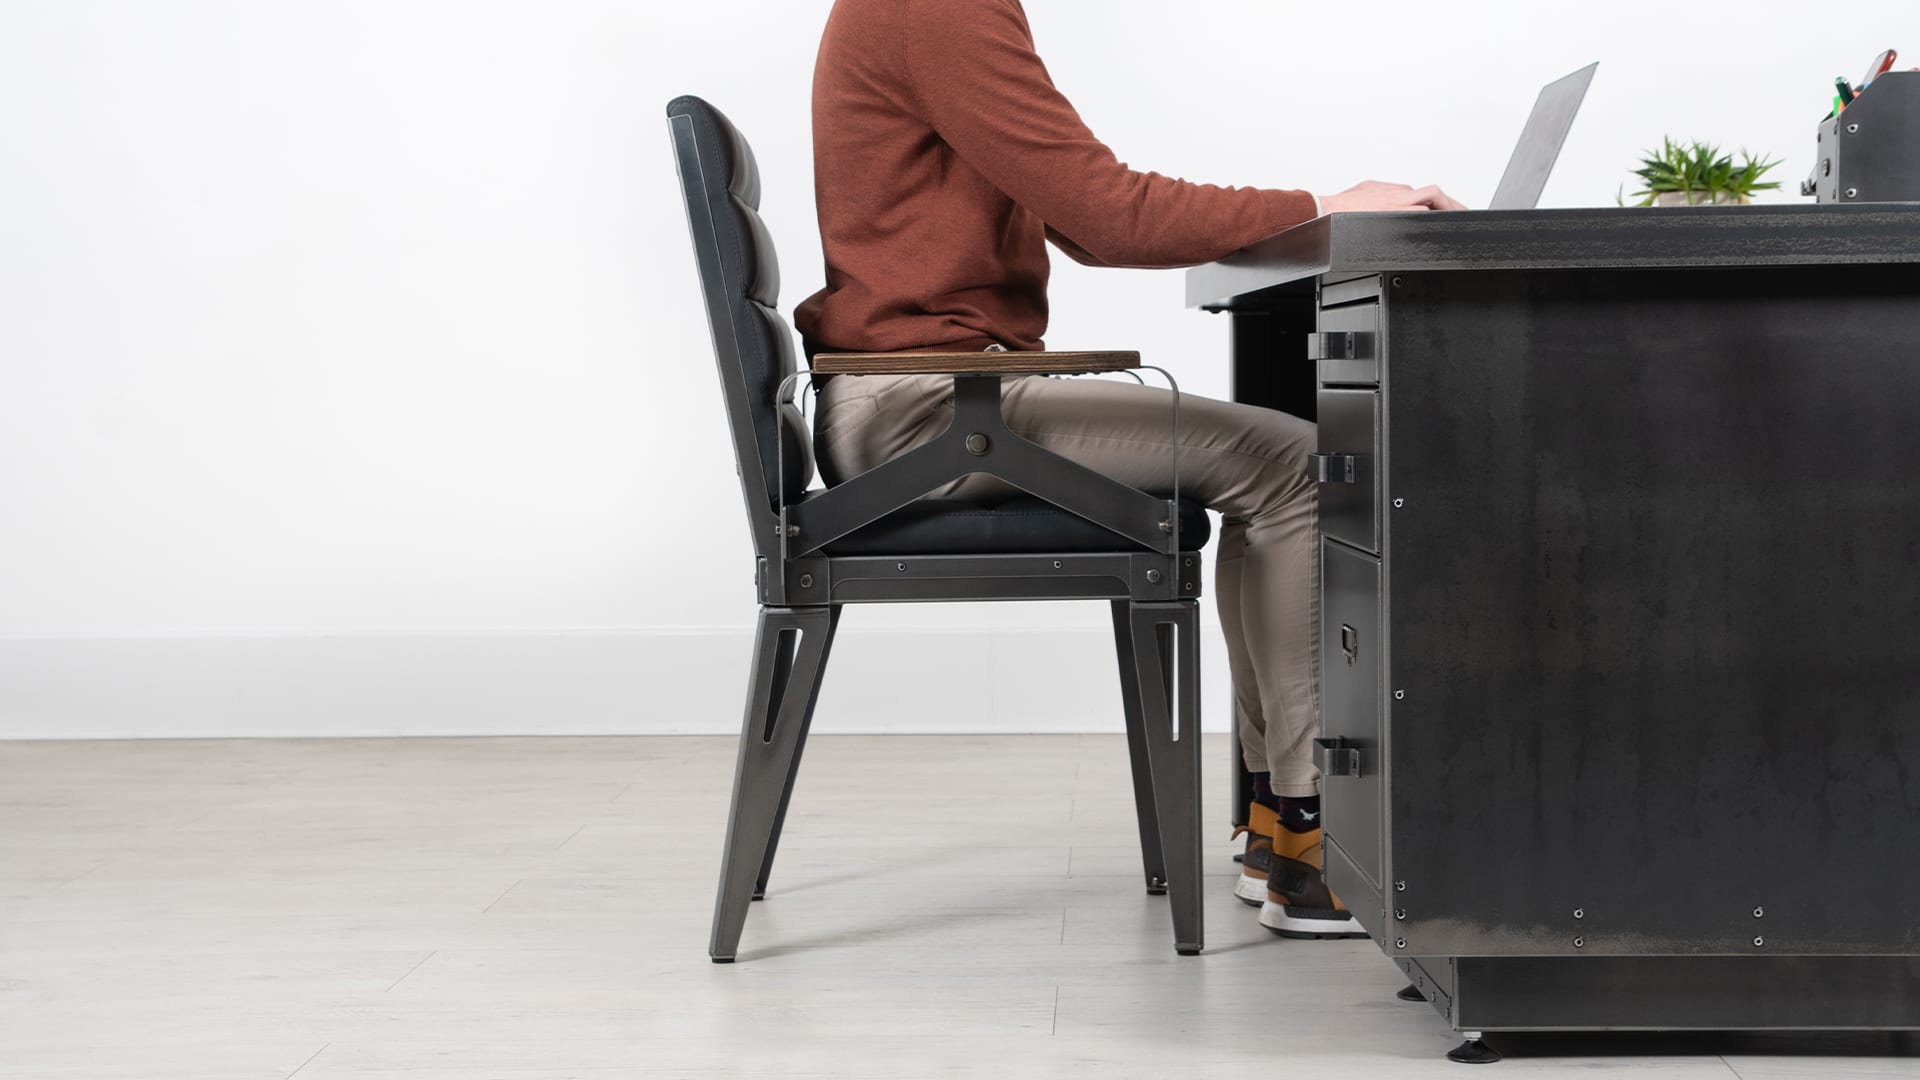 Office Chair Ergonomics and You